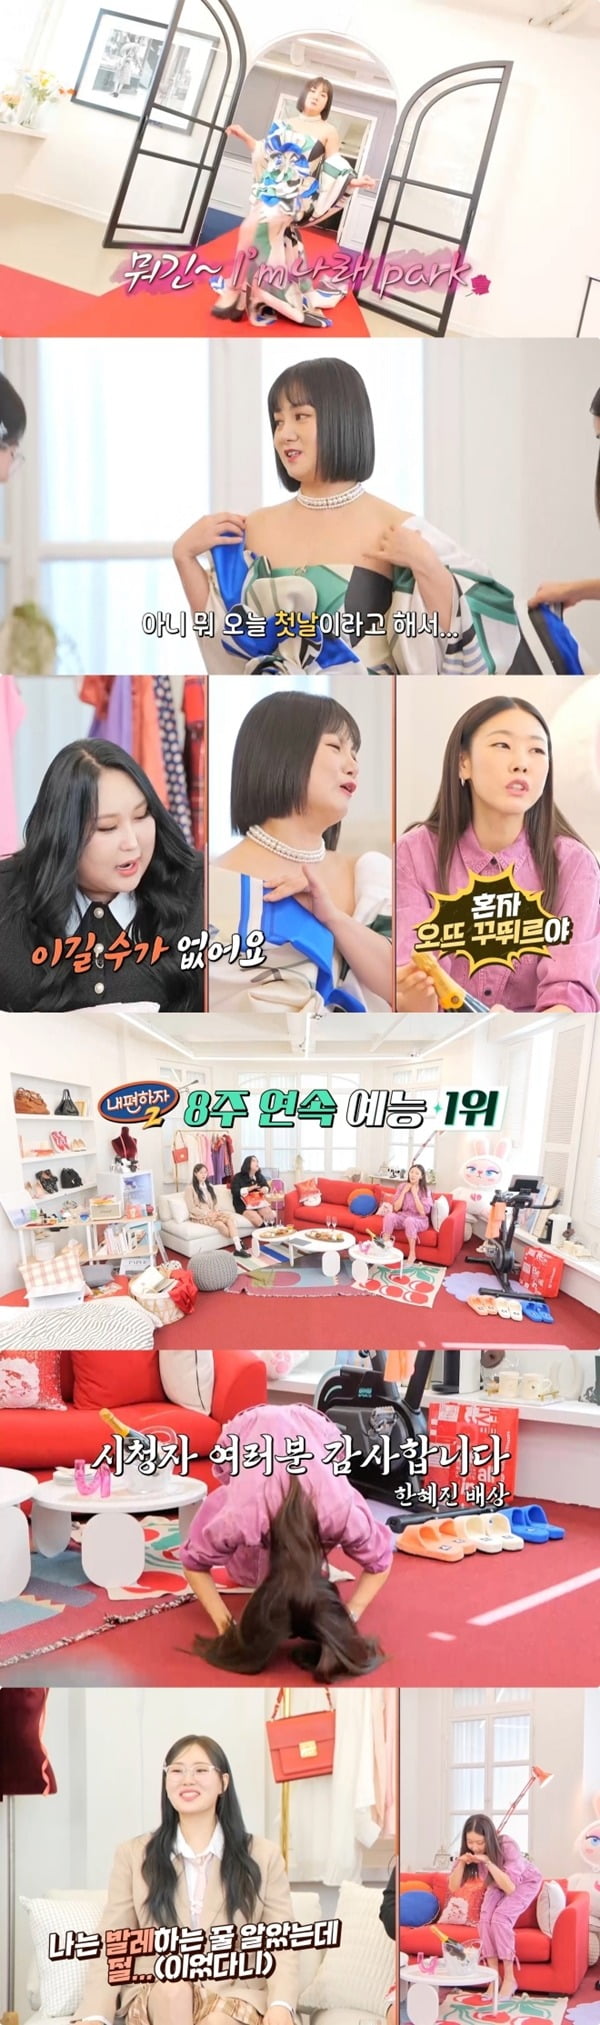 Park Na-rae, even her dress looks different... Hyejin Han makes exclamations repeatedly